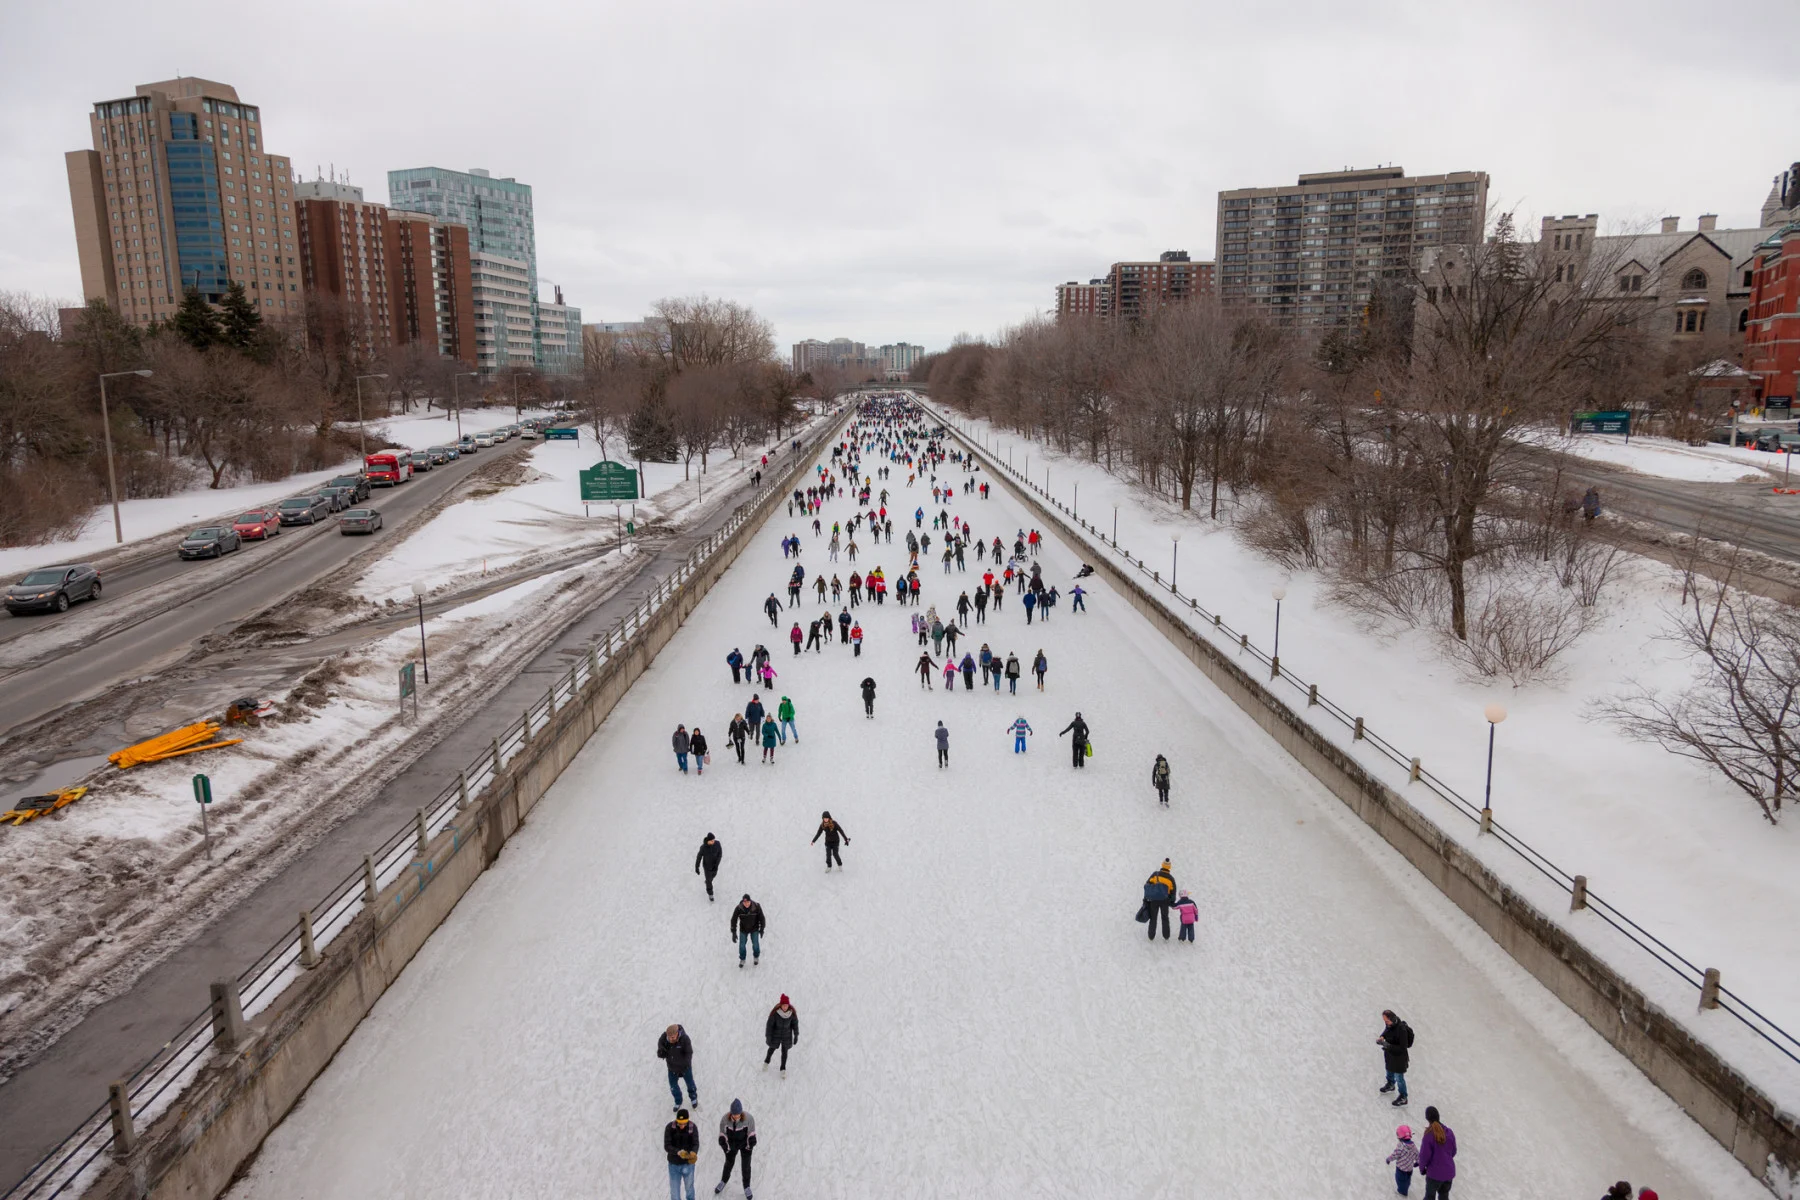 rideau canal (Mark Spowart/ Getty Images)